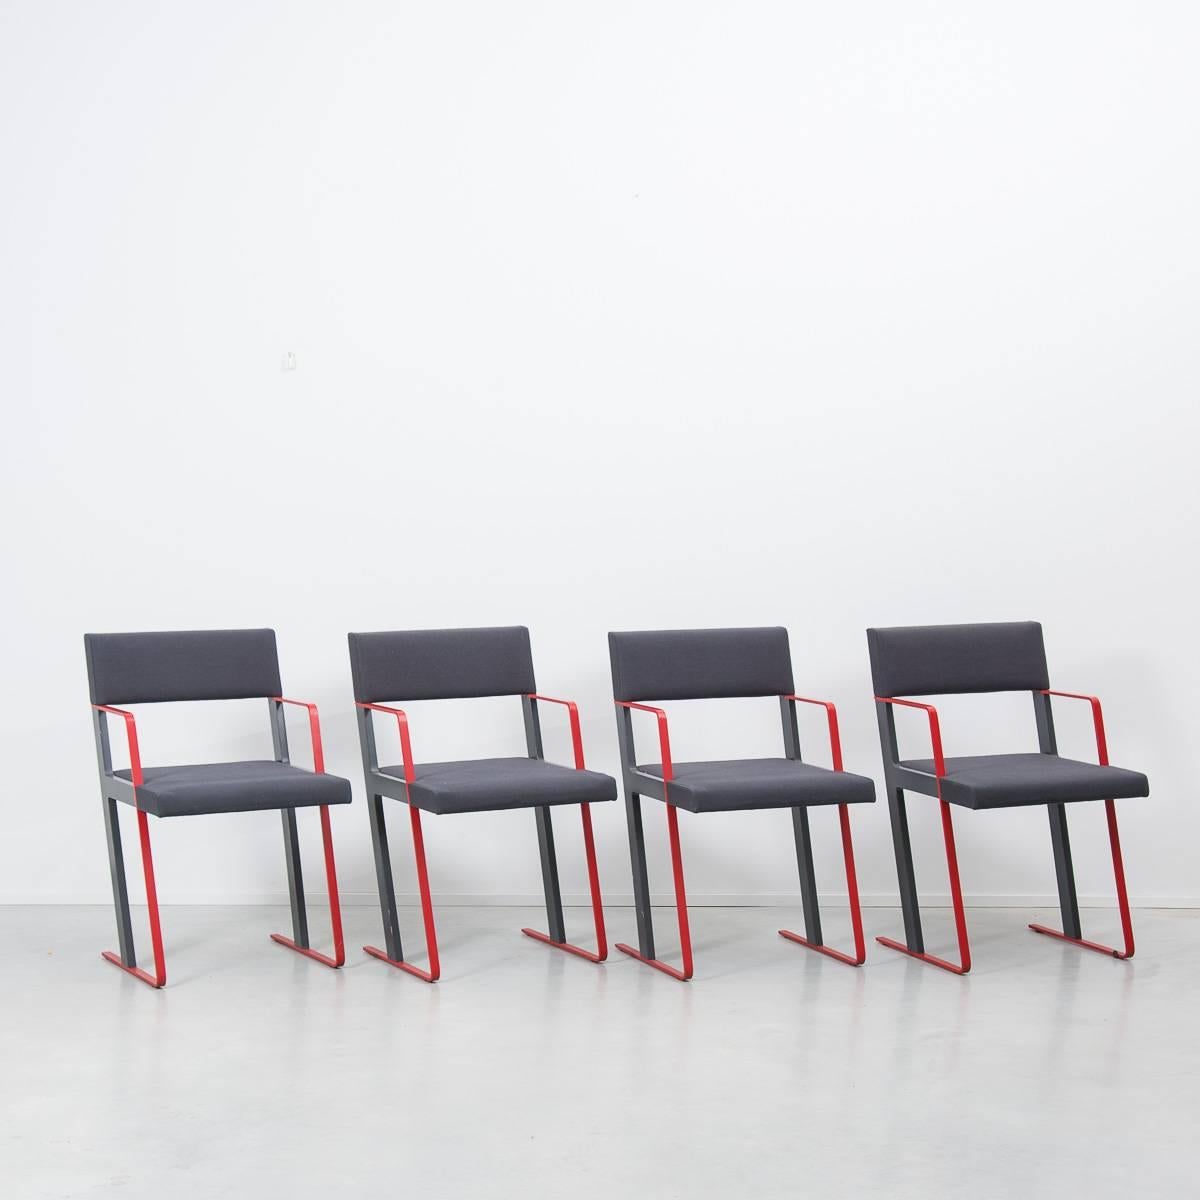 Minimalist Postmodern dining chairs four by Dick Spierenburg for Castelijn, manufactured in 1978. A statement slant. Made from a frame of wood and steel with a grey wool upholstery. Good original condition, only minimal age wear.

Dick